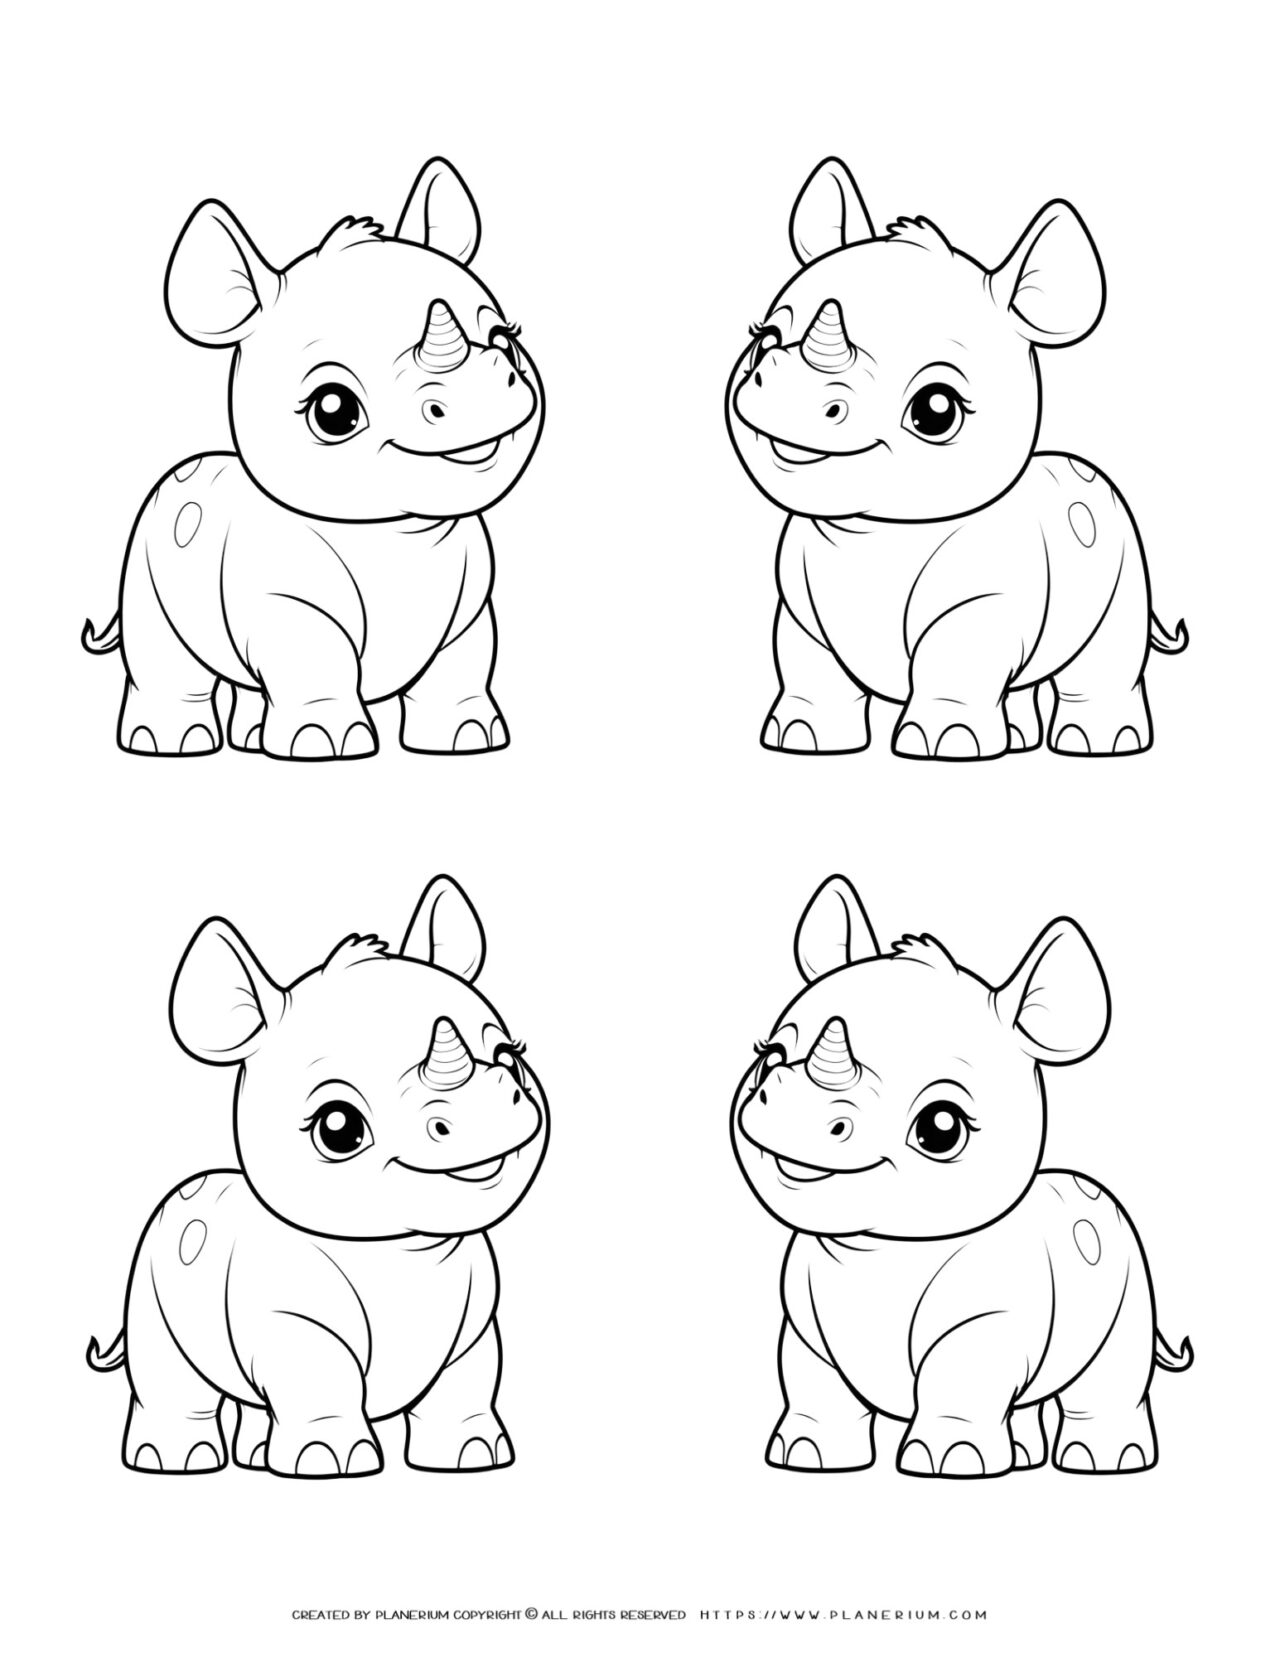 four-cute-baby-rhinoceros-outline-animal-coloring-page-for-kids